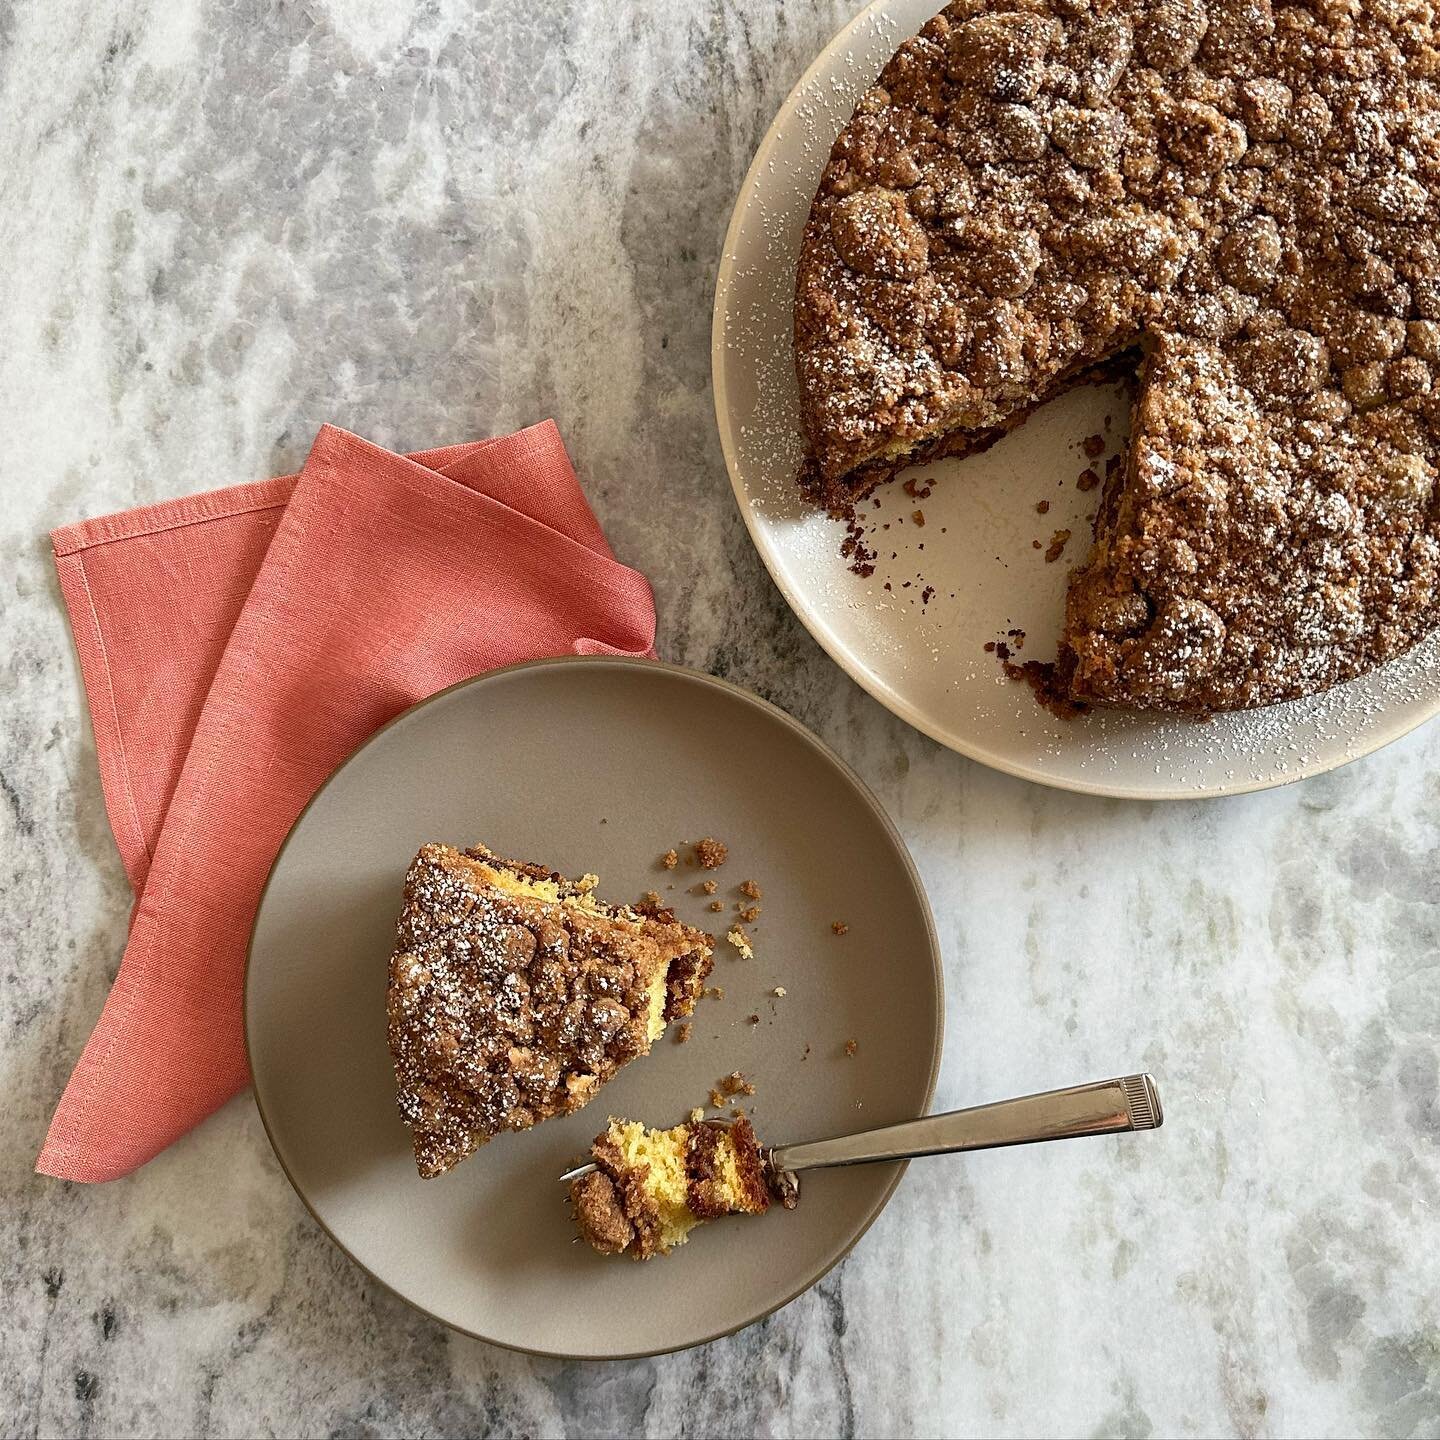 Let&rsquo;s be real: Coffee cake is all about the crunchy, cinnamon-y streusel. I perfected this topping for all those in Camp Crumb. (Plus, I also made a pretttty delicious cake with an extra-wide band of filling.)

Grab the recipe for Sour Cream Co